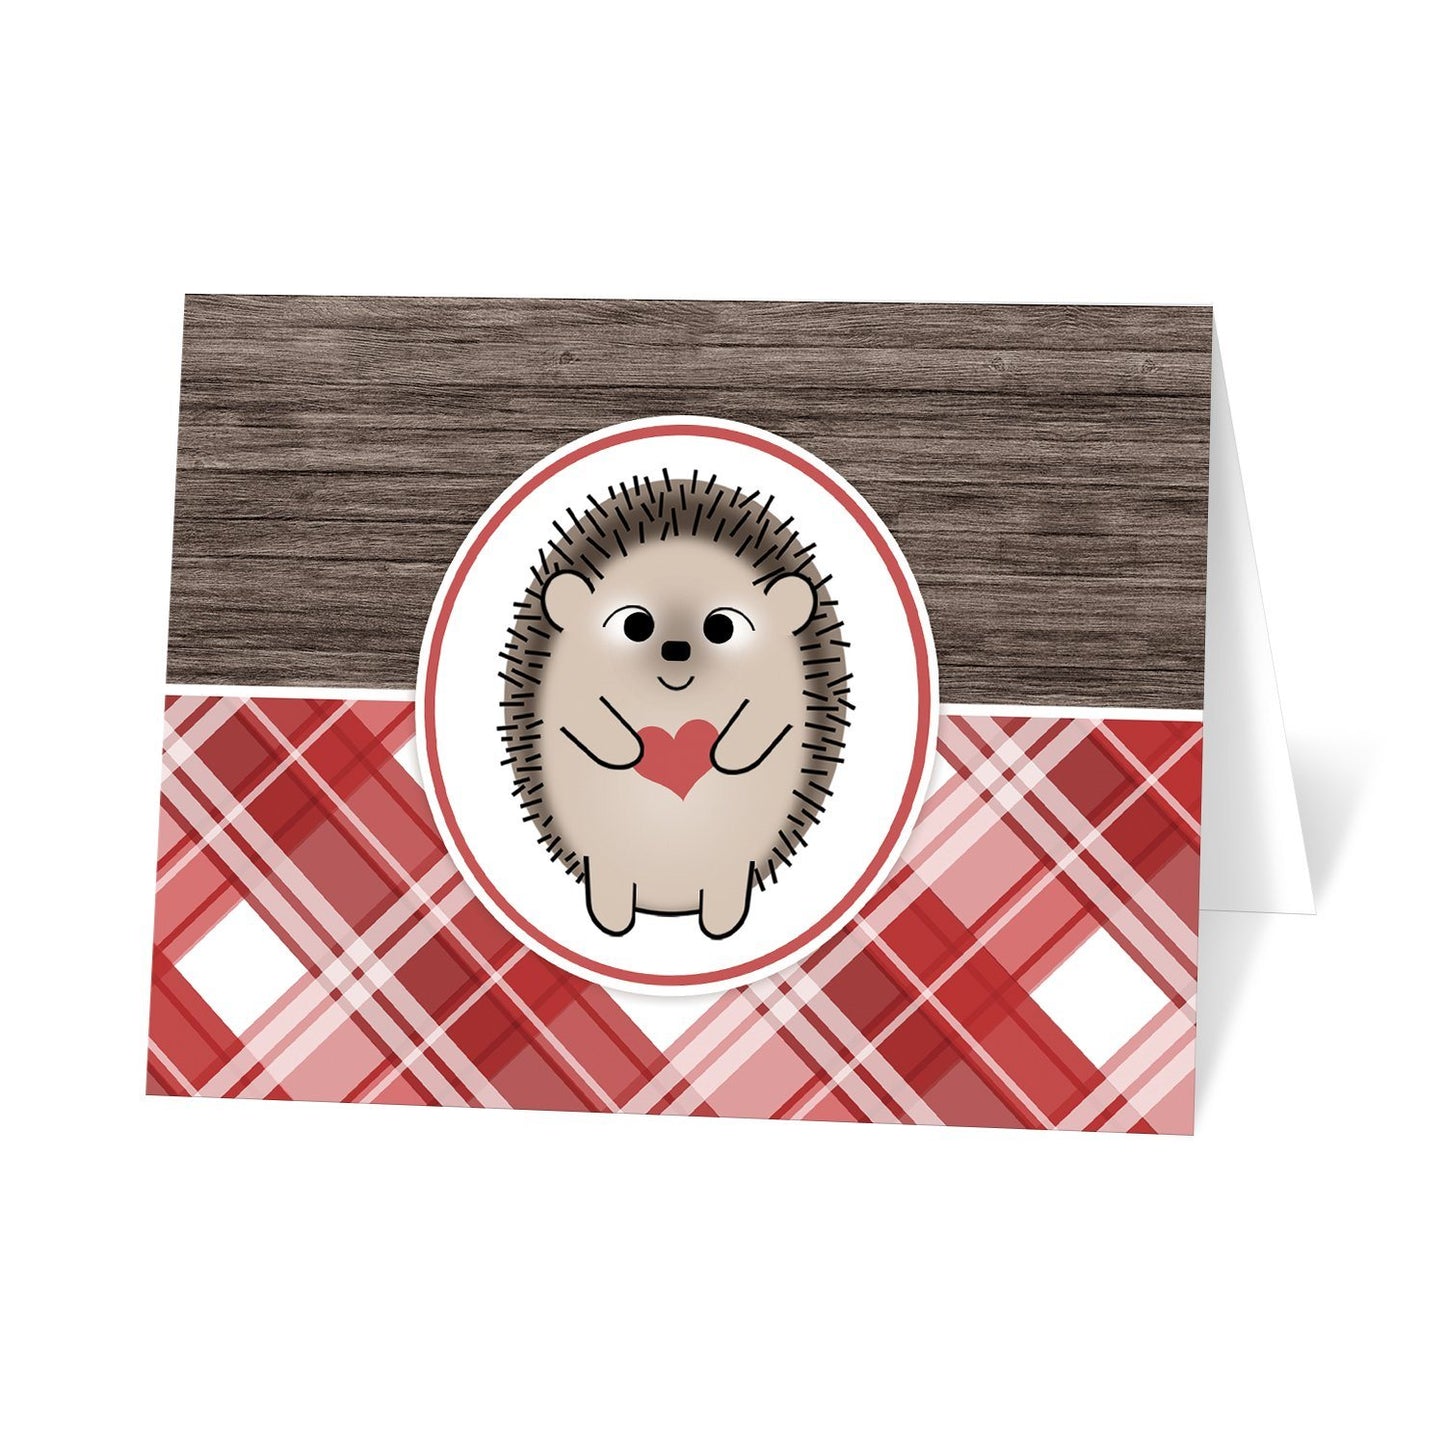 Rustic Hedgehog Heart Wood Red Plaid Note Cards at Artistically Invited